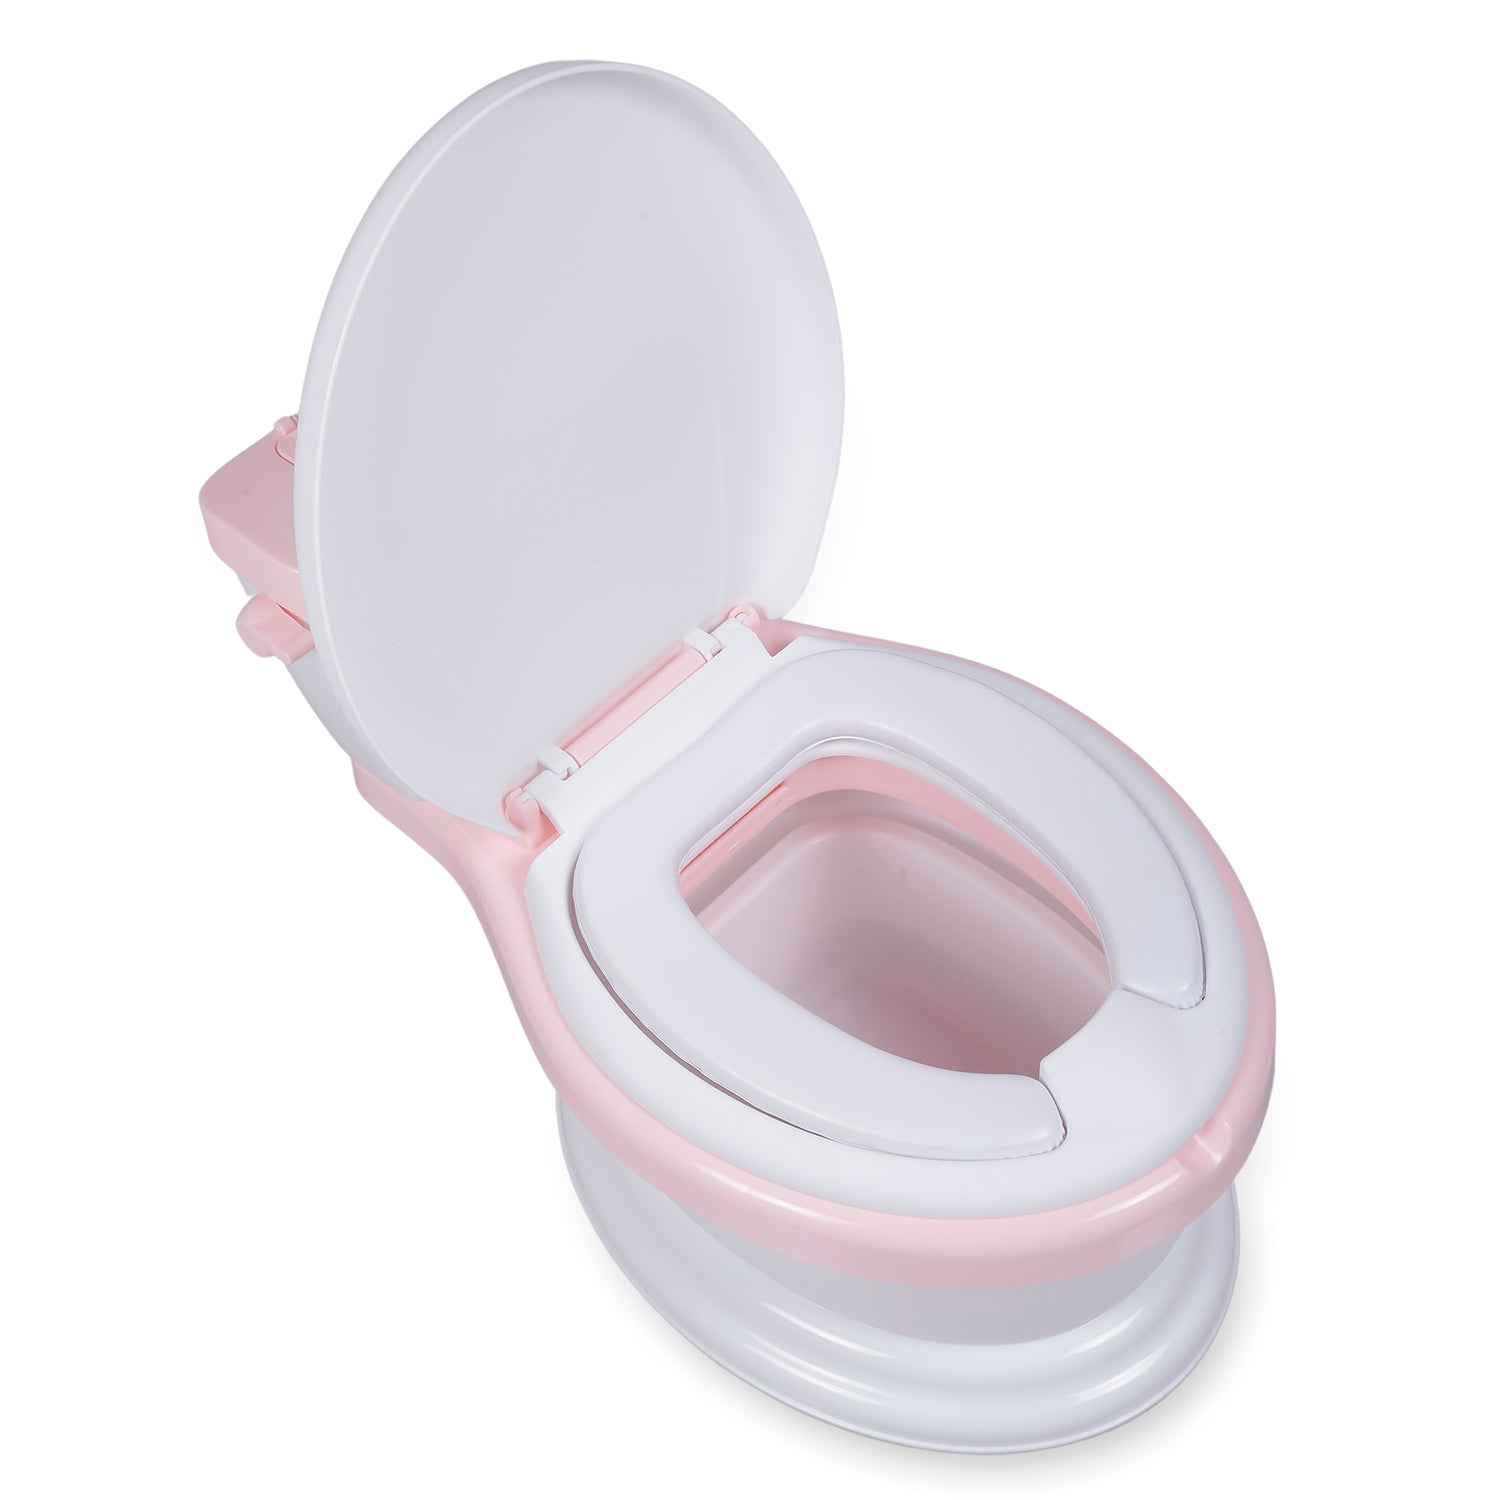 Toilet Training Potty Chair Realistic Western Style Pink - Baby Moo